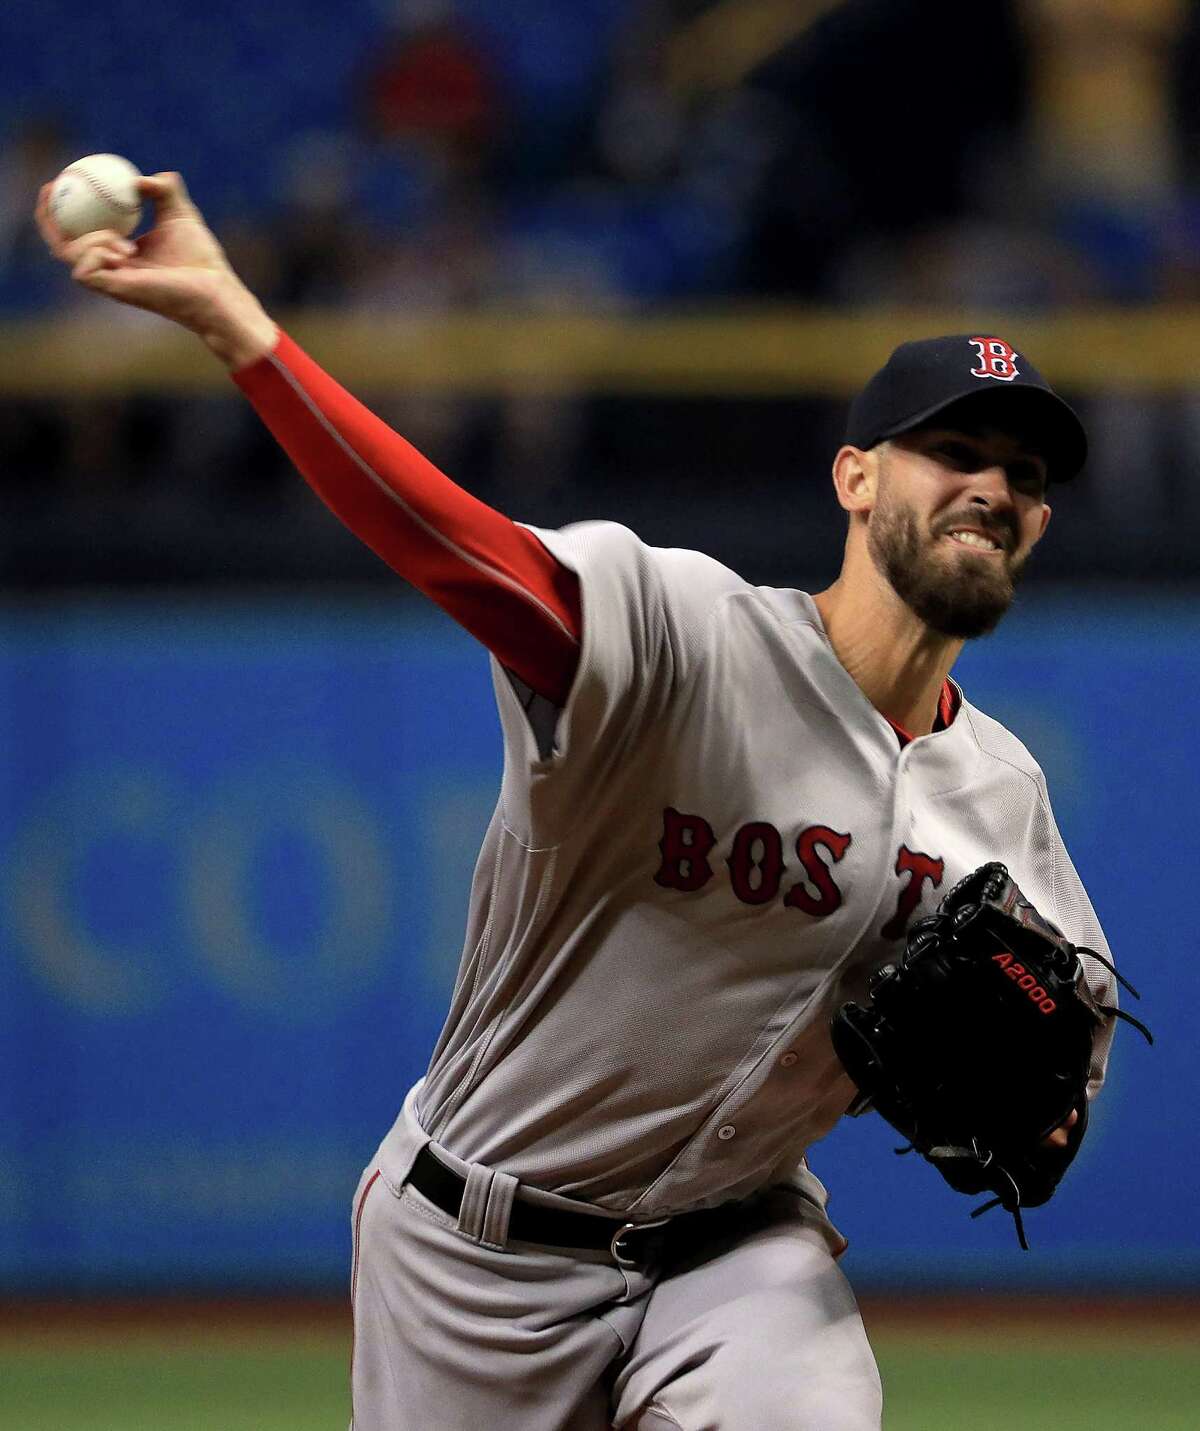 ST PETERSBURG, FL - MAY 24: Rick Porcello #22 of the Boston Red Sox pitches during a game against the Tampa Bay Rays at Tropicana Field on May 24, 2018 in St Petersburg, Florida. (Photo by Mike Ehrmann/Getty Images)